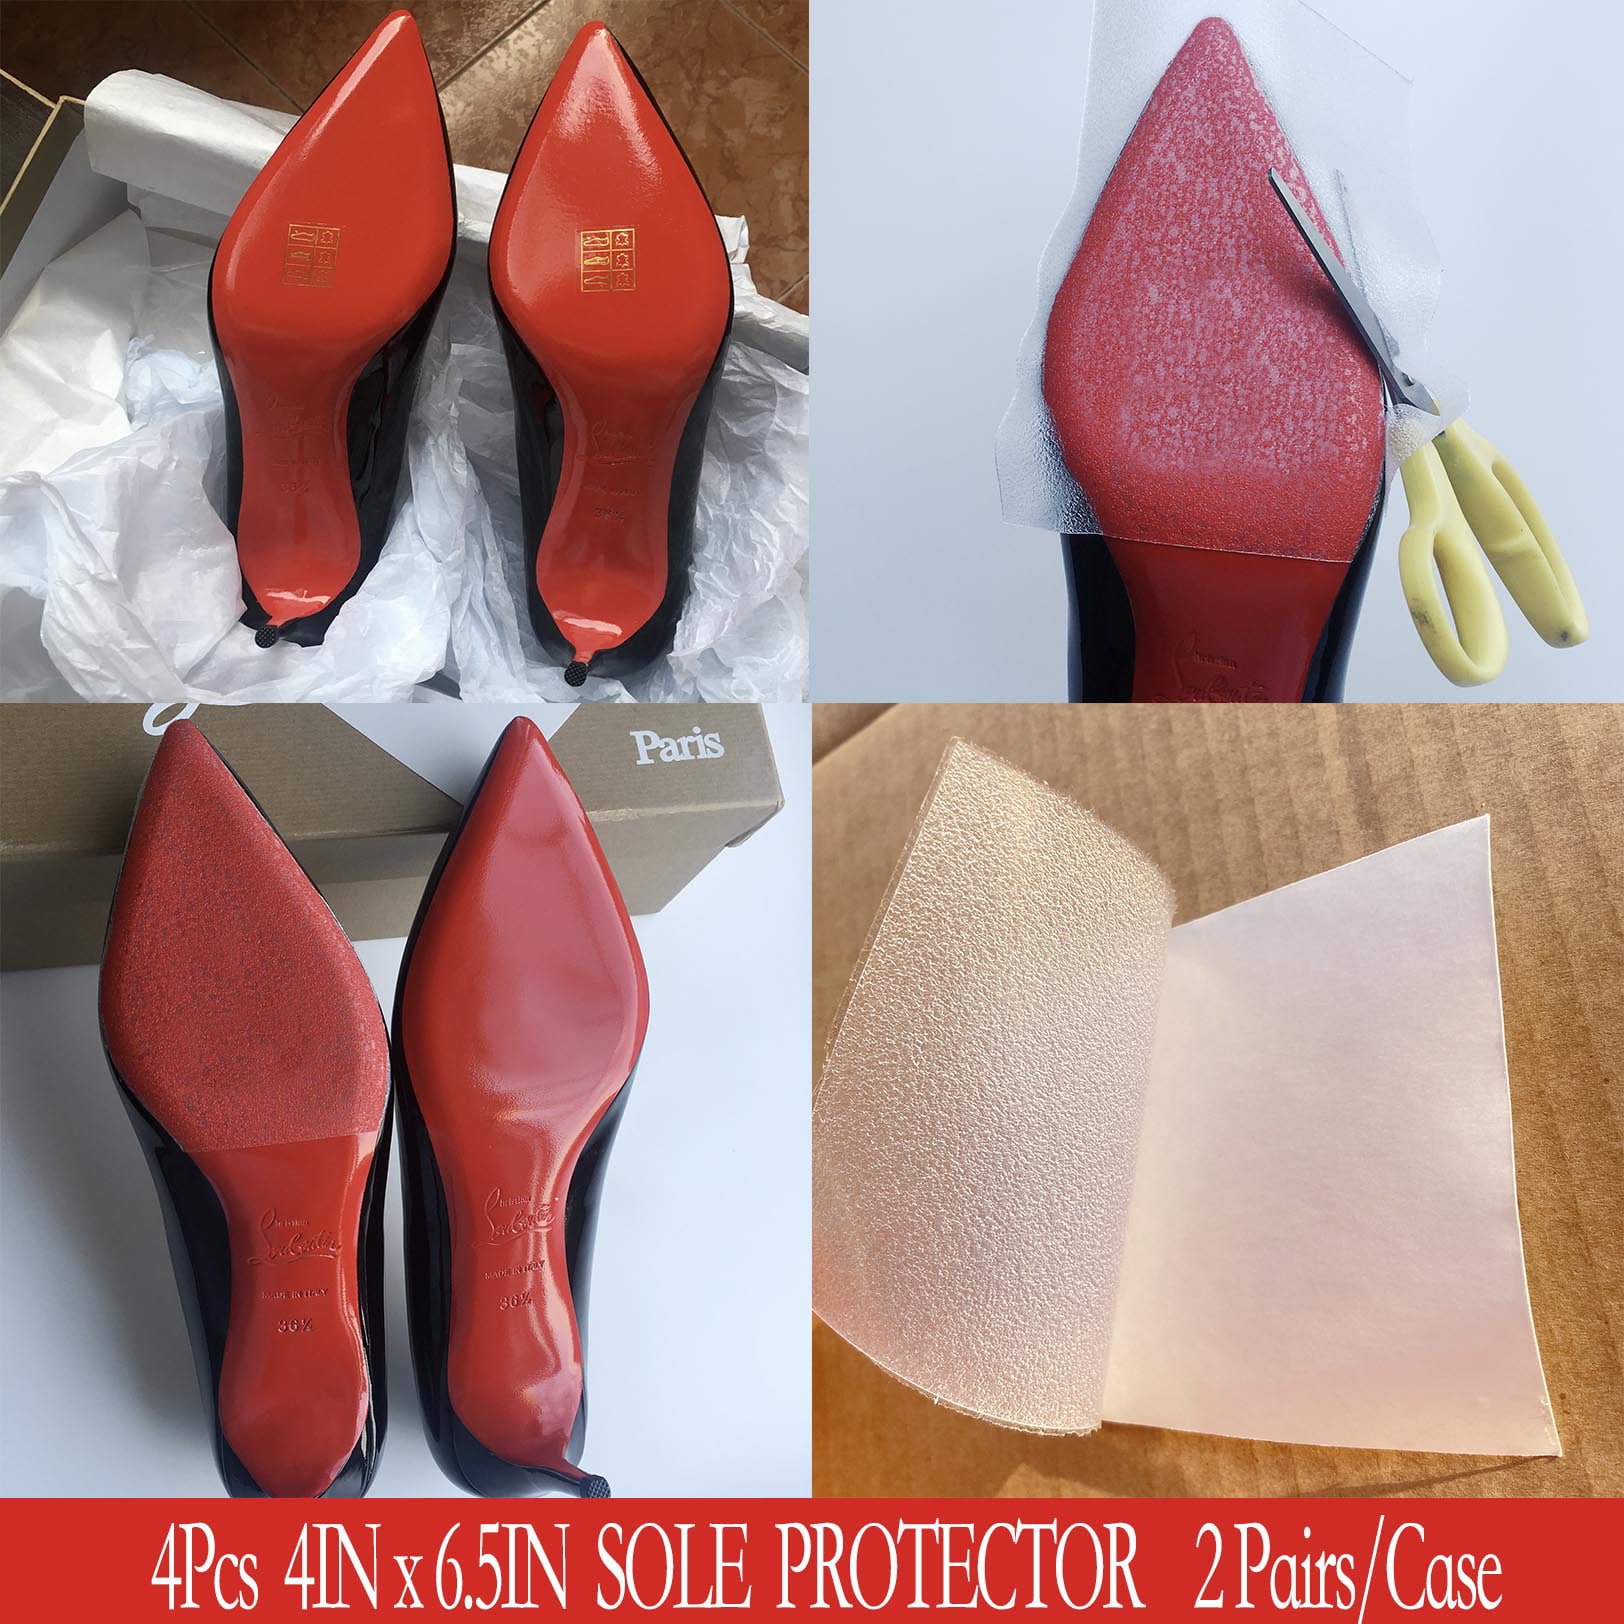  Sole Protector, Red Bottom Protectors, Heel Protectors, Shoe  Grips, Shoe Sole Protector, Sole Sticker, Sneaker Sole Protector : Health &  Household